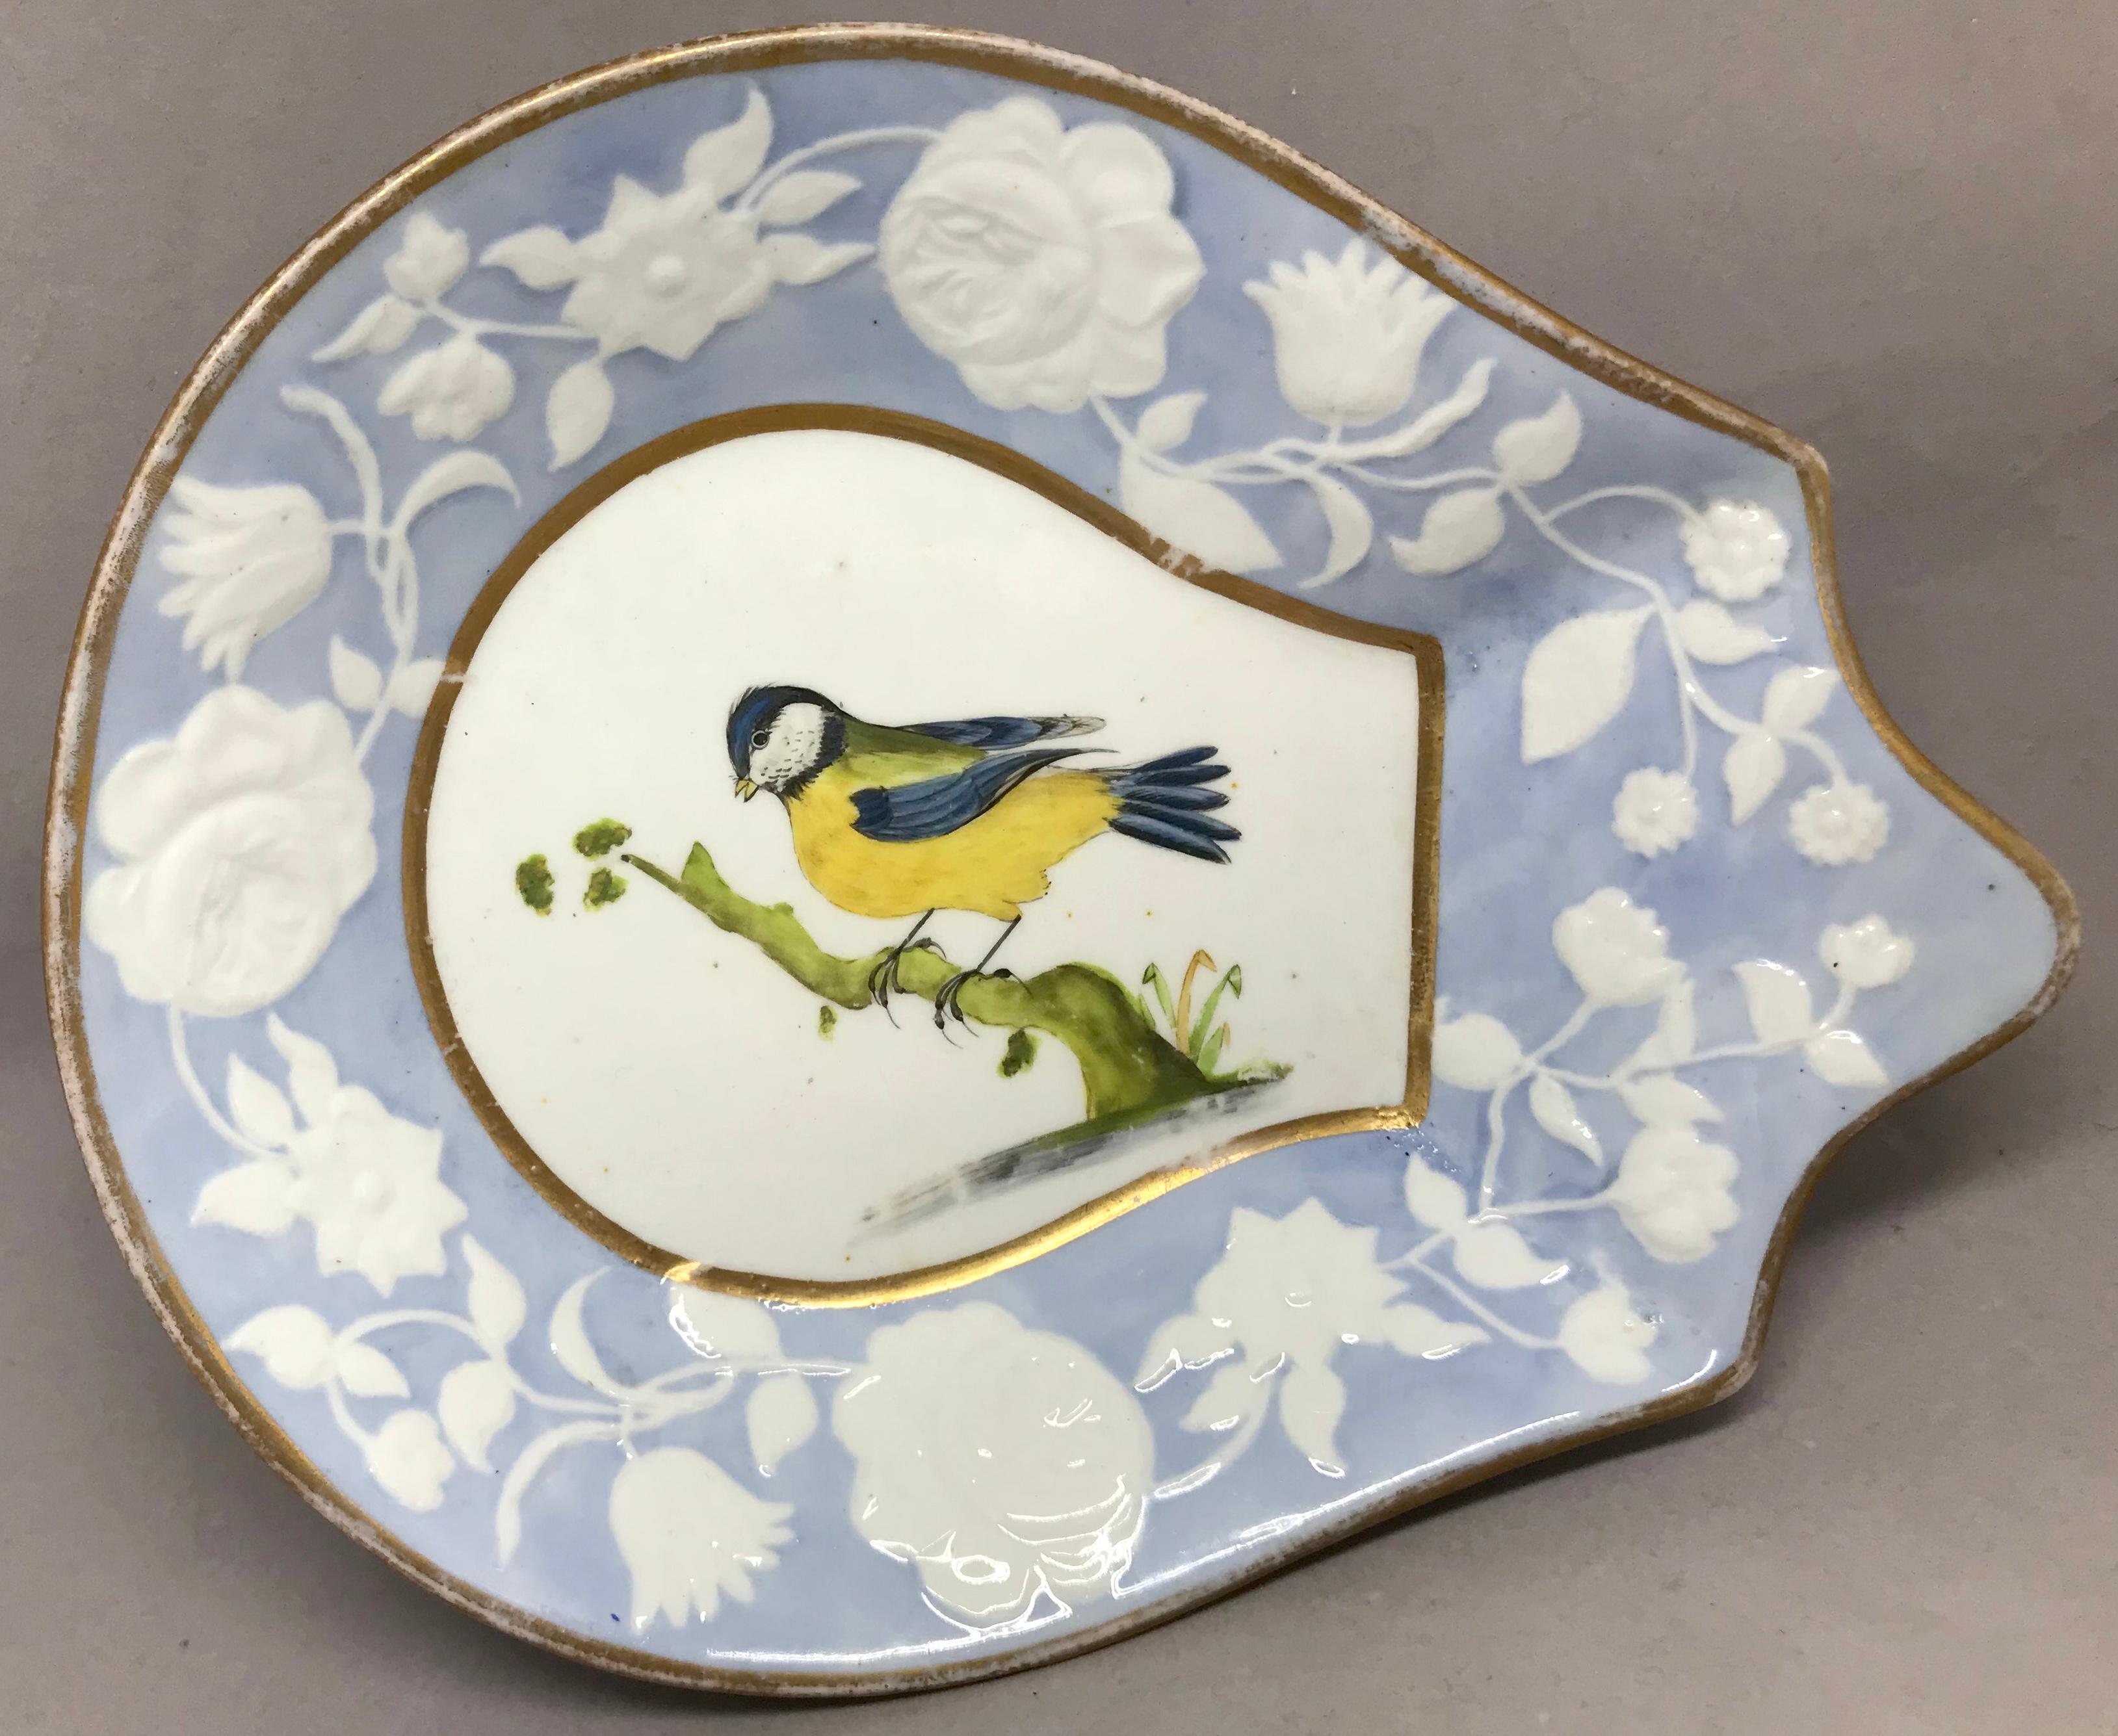 Pair of blue and white gilt bird dishes. Lovely pair shaped sweetmeat dishes with pale blue violet and white floral surrounds and hand painted birds with gilt rims. England, circa 1840.
Dimensions: 8.5